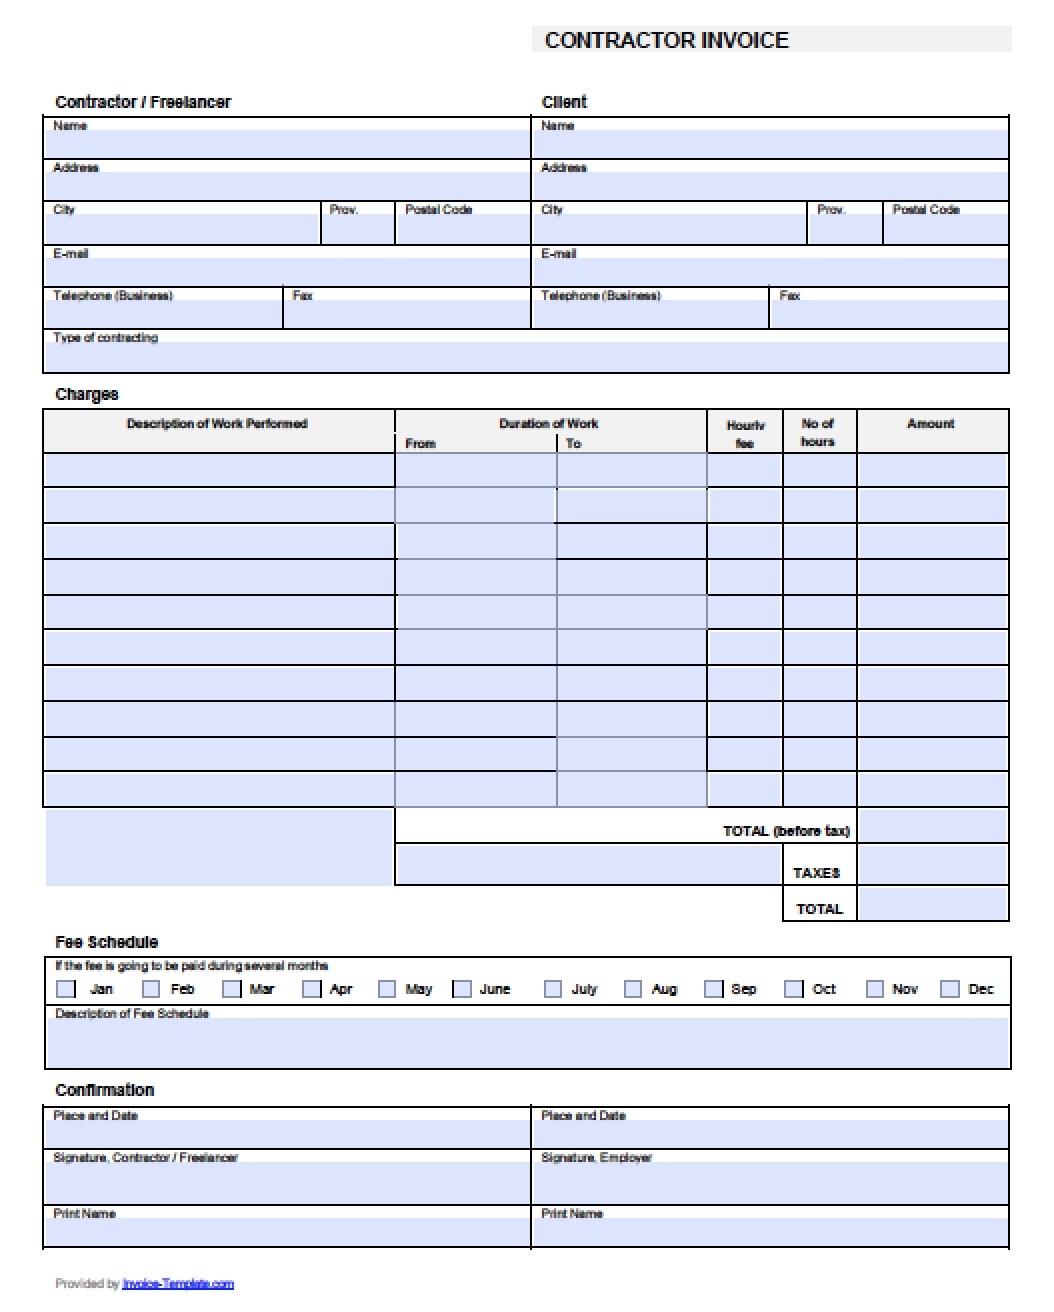 free contractor invoice template excel pdf word doc contractor invoice template excel